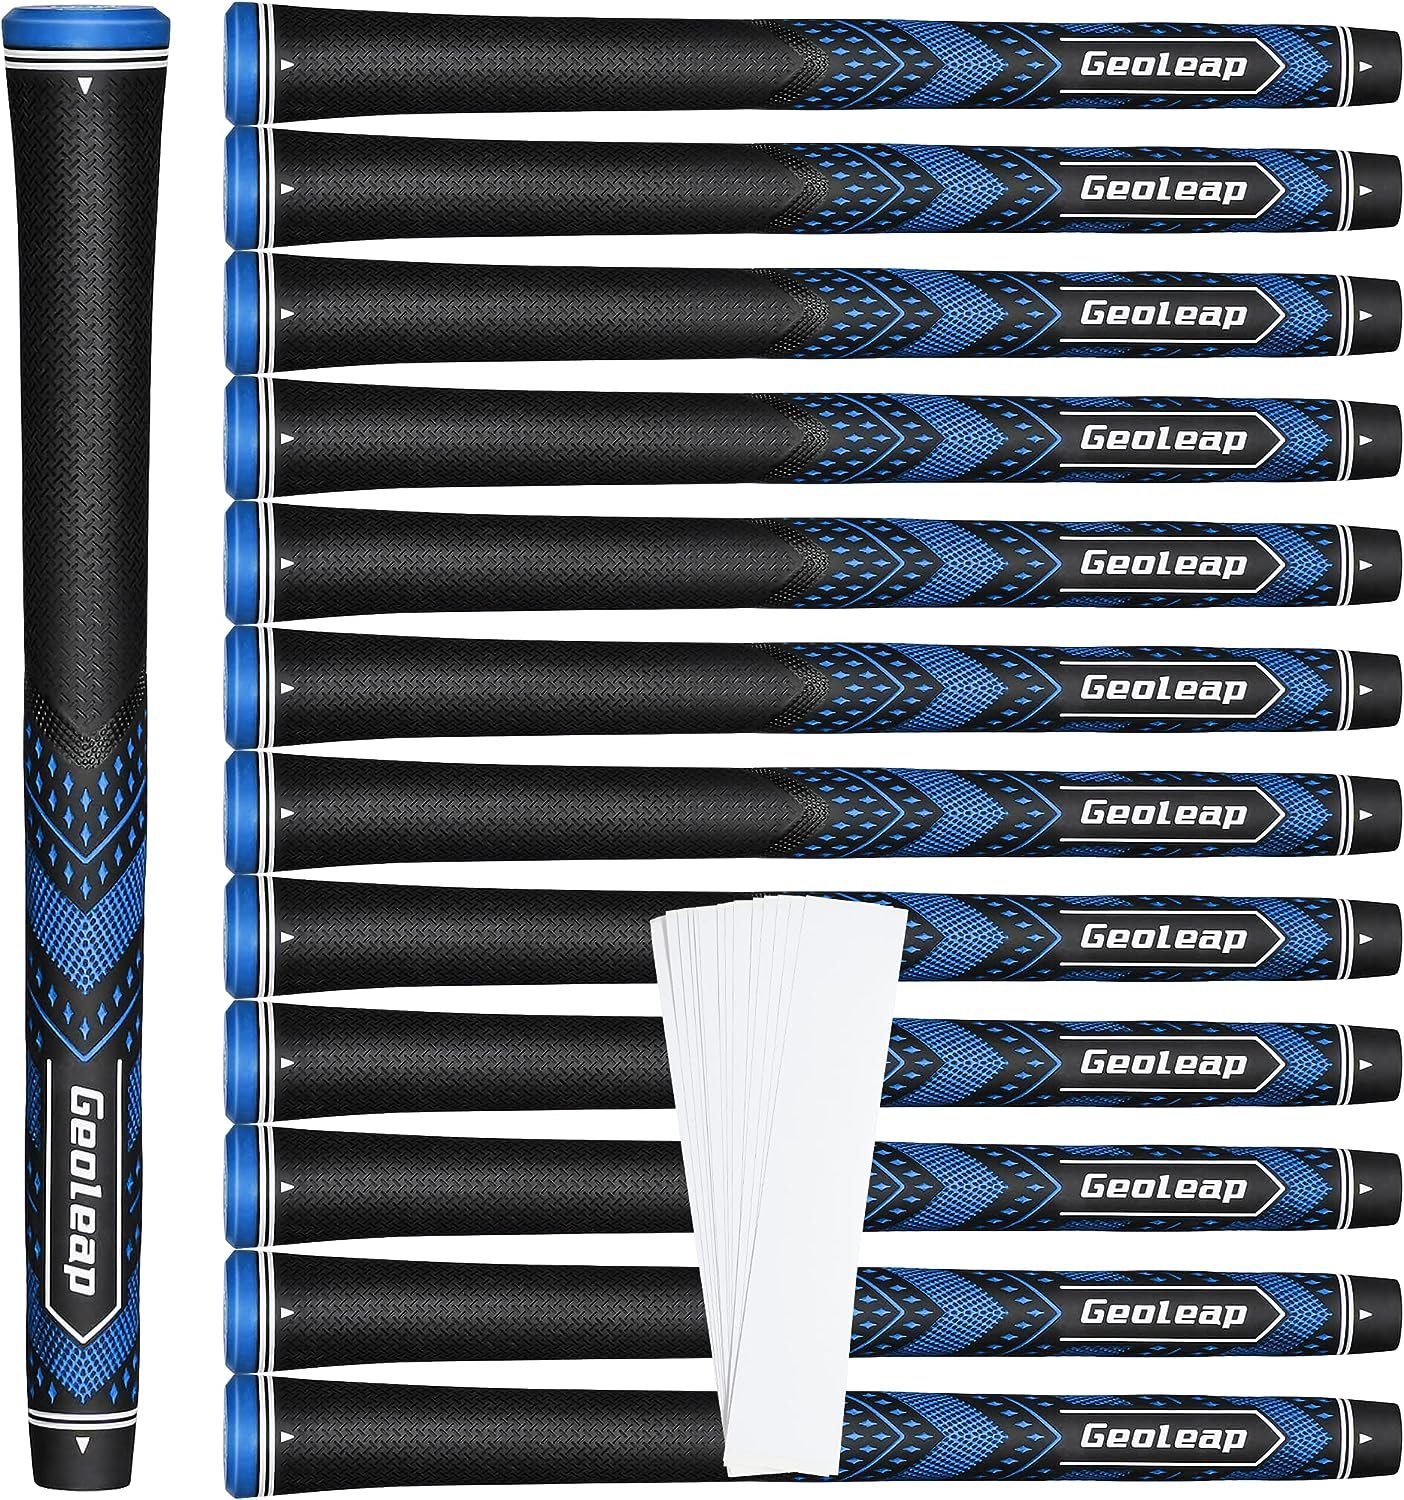 Geoleap Golf Grips Set of 13- Soft Golf Club Grips,Reduce Taper Design Provides High Traction and Performance,13 Grips with 15 Tapes and 13 Grips with All Repair Kits for Choice.